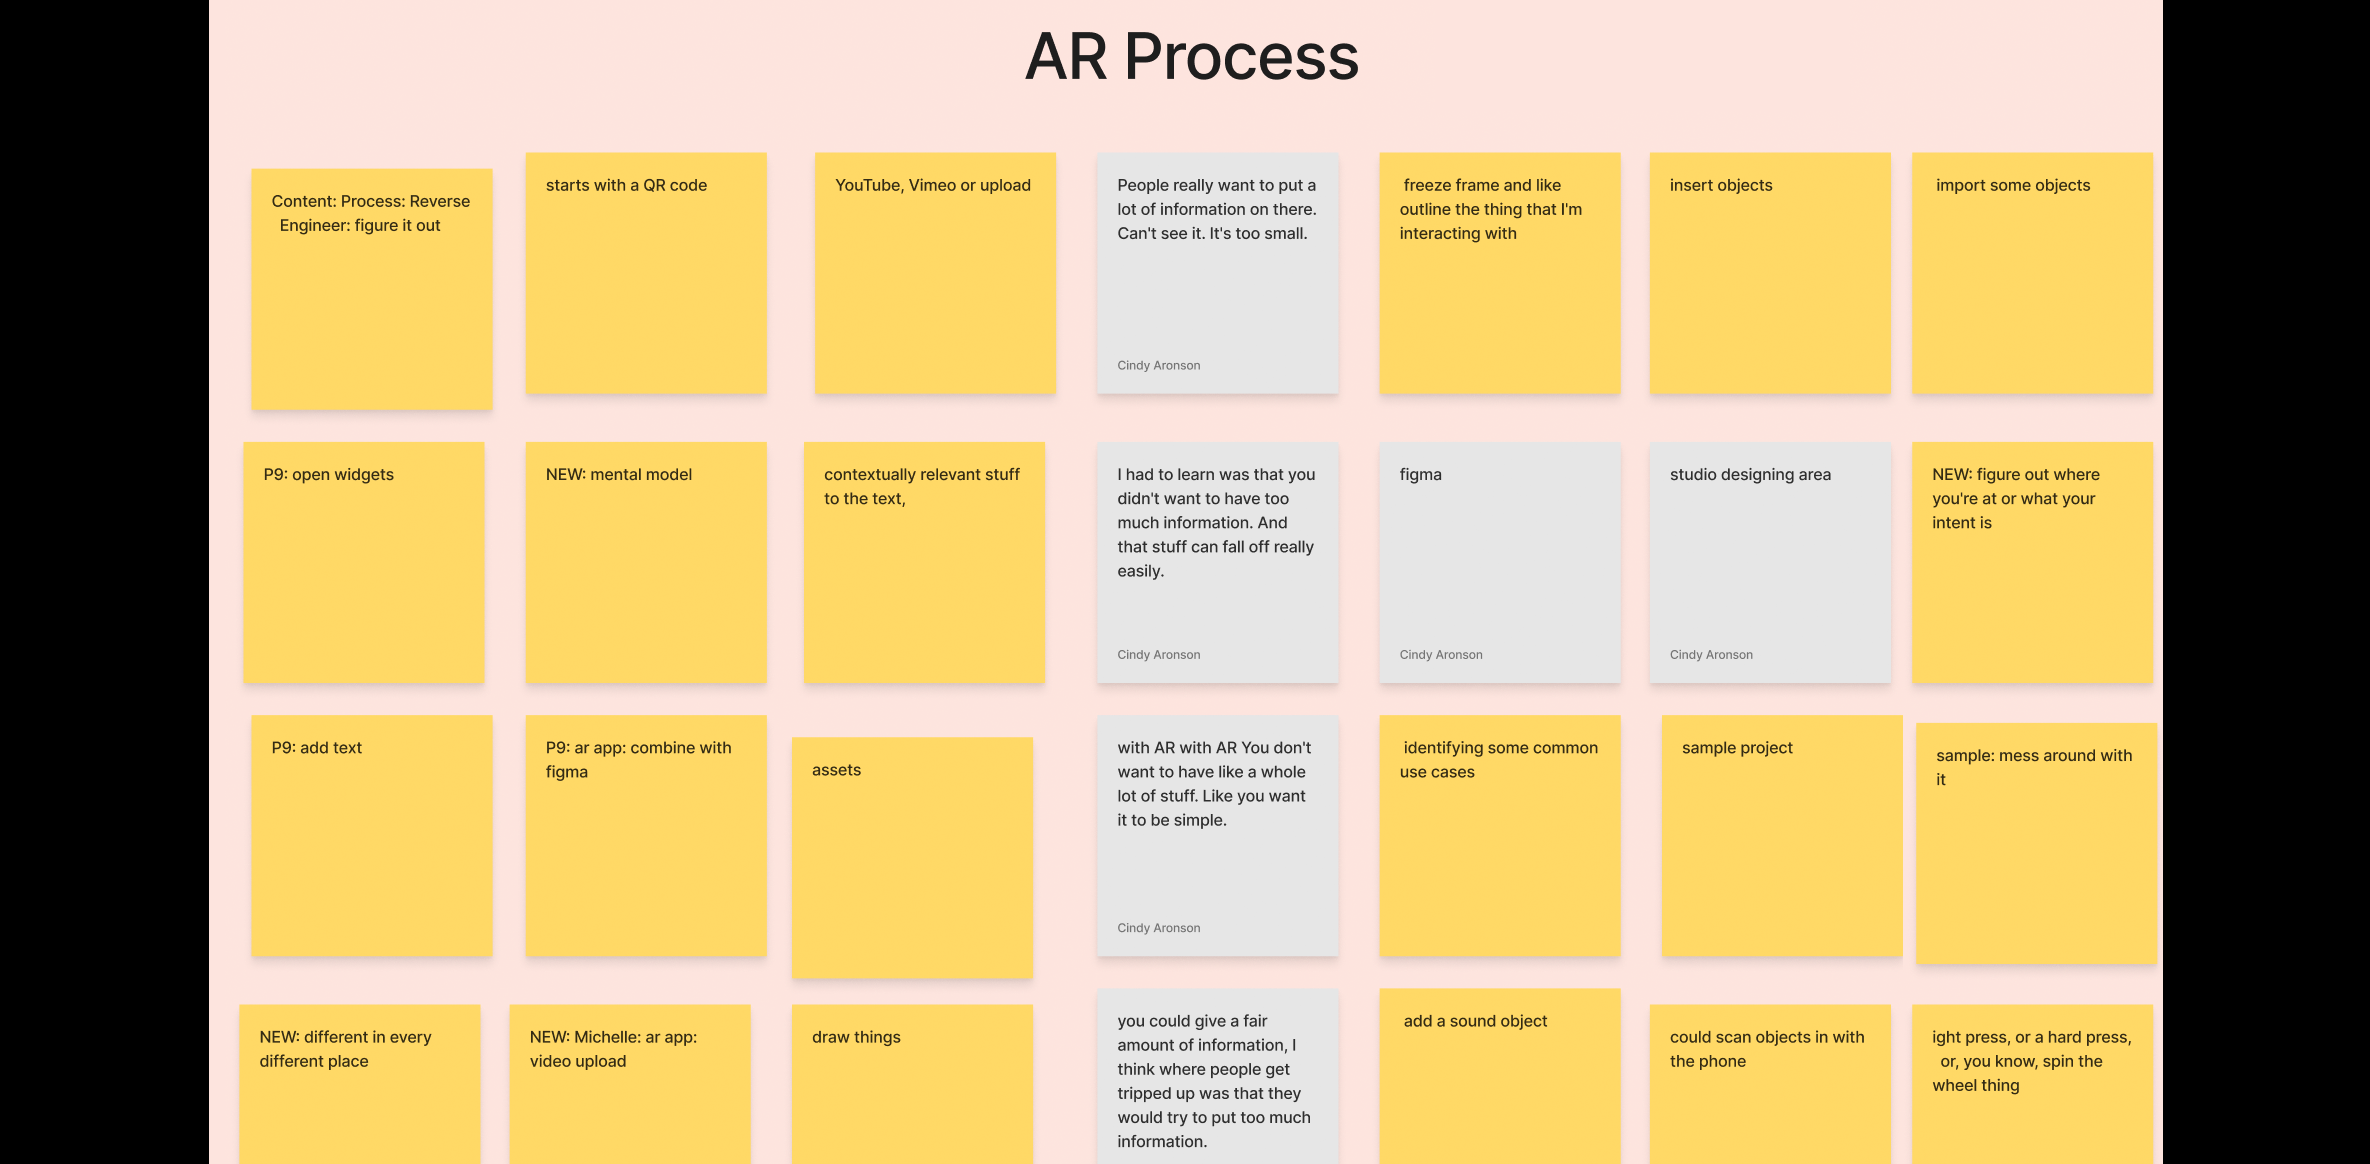 Expert Affinity Diagram of AR Process category.